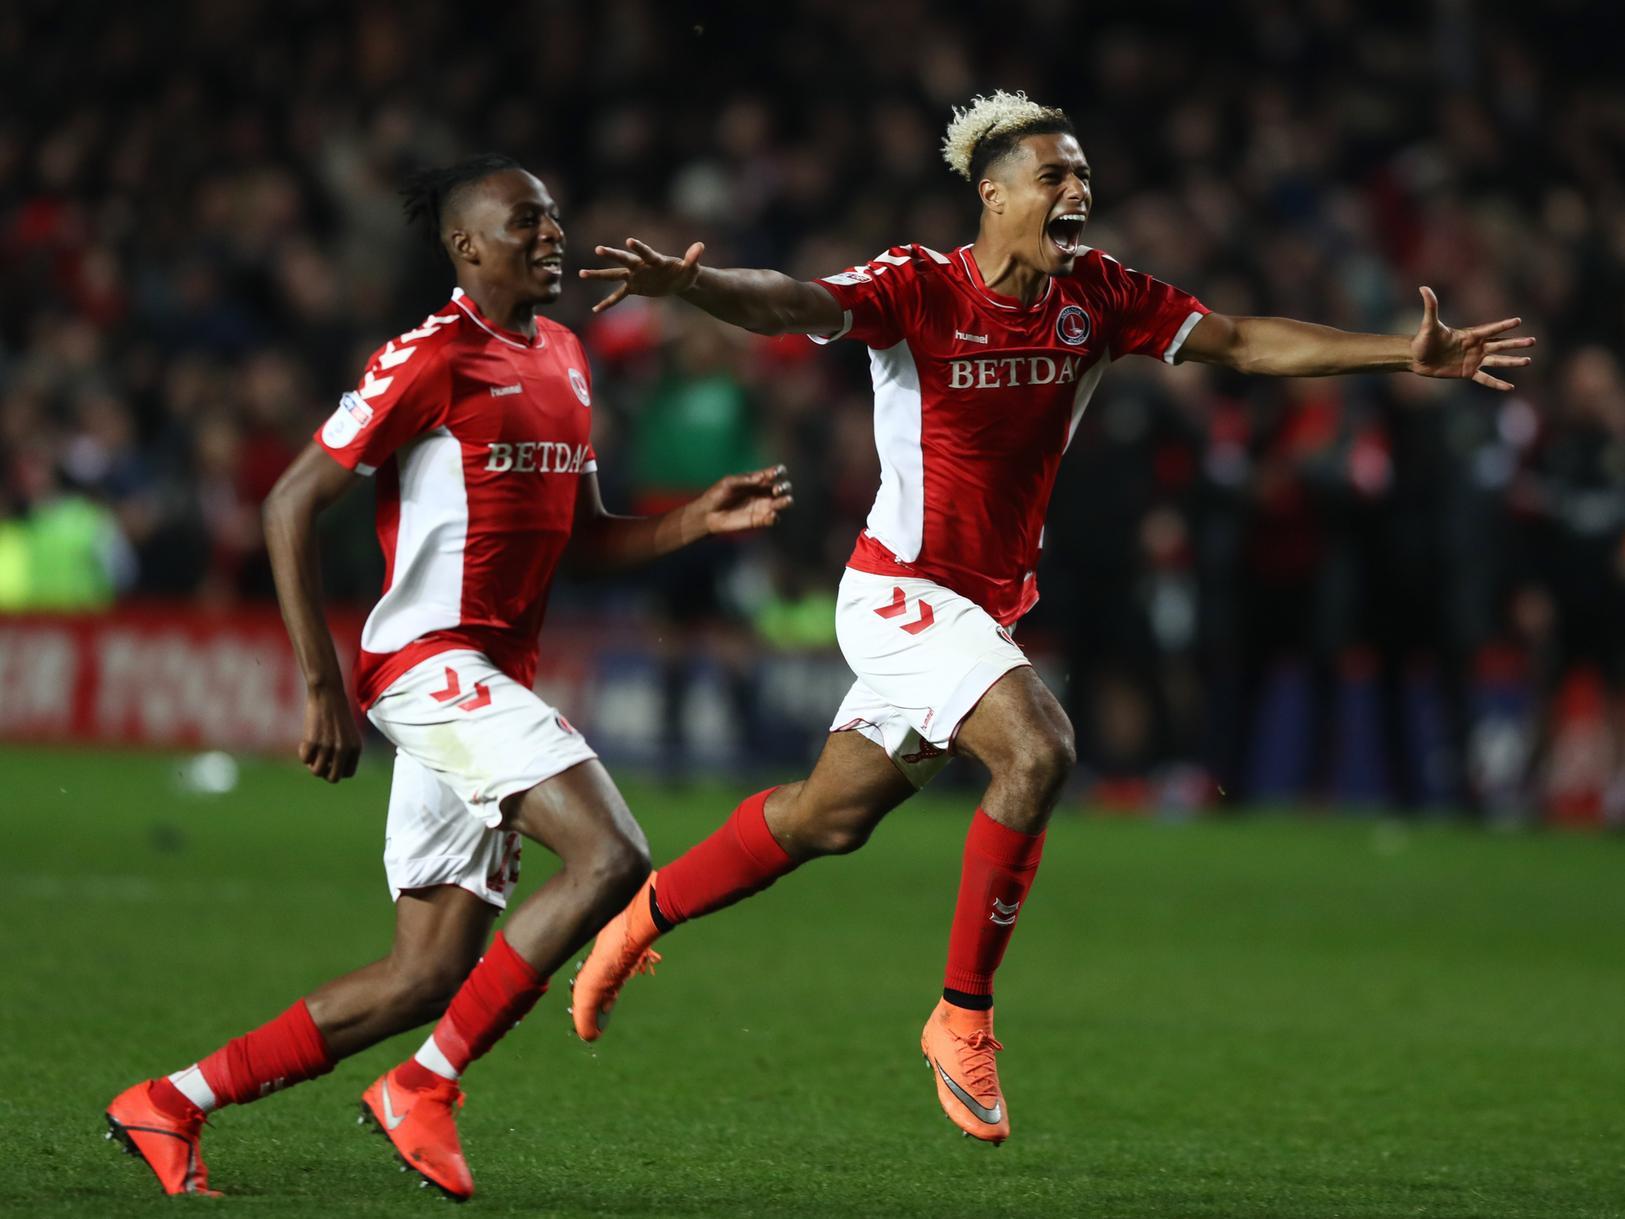 Brentford remain the bookies' favourites to secure a move for Charlton Athletic striker Lyle Taylor, who is in high demand after an excellent season in the Championship so far. (Sky Bet)